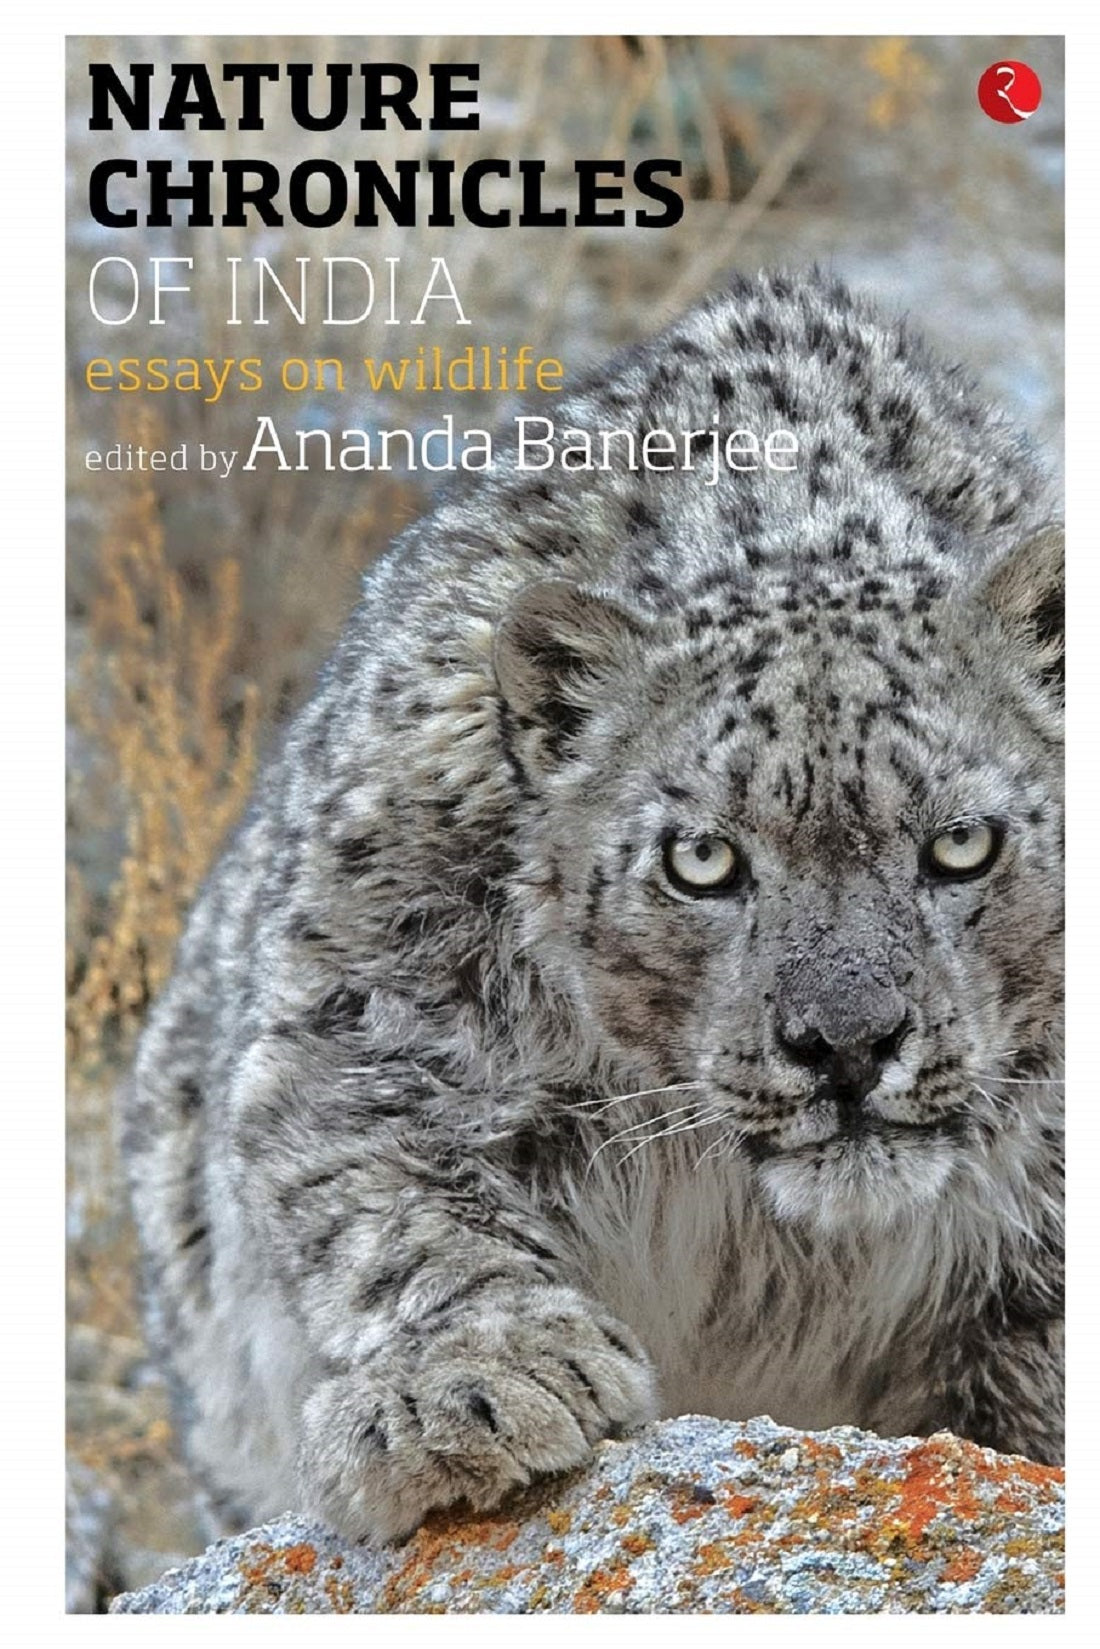 NATURE CHRONICLES OF INDIA